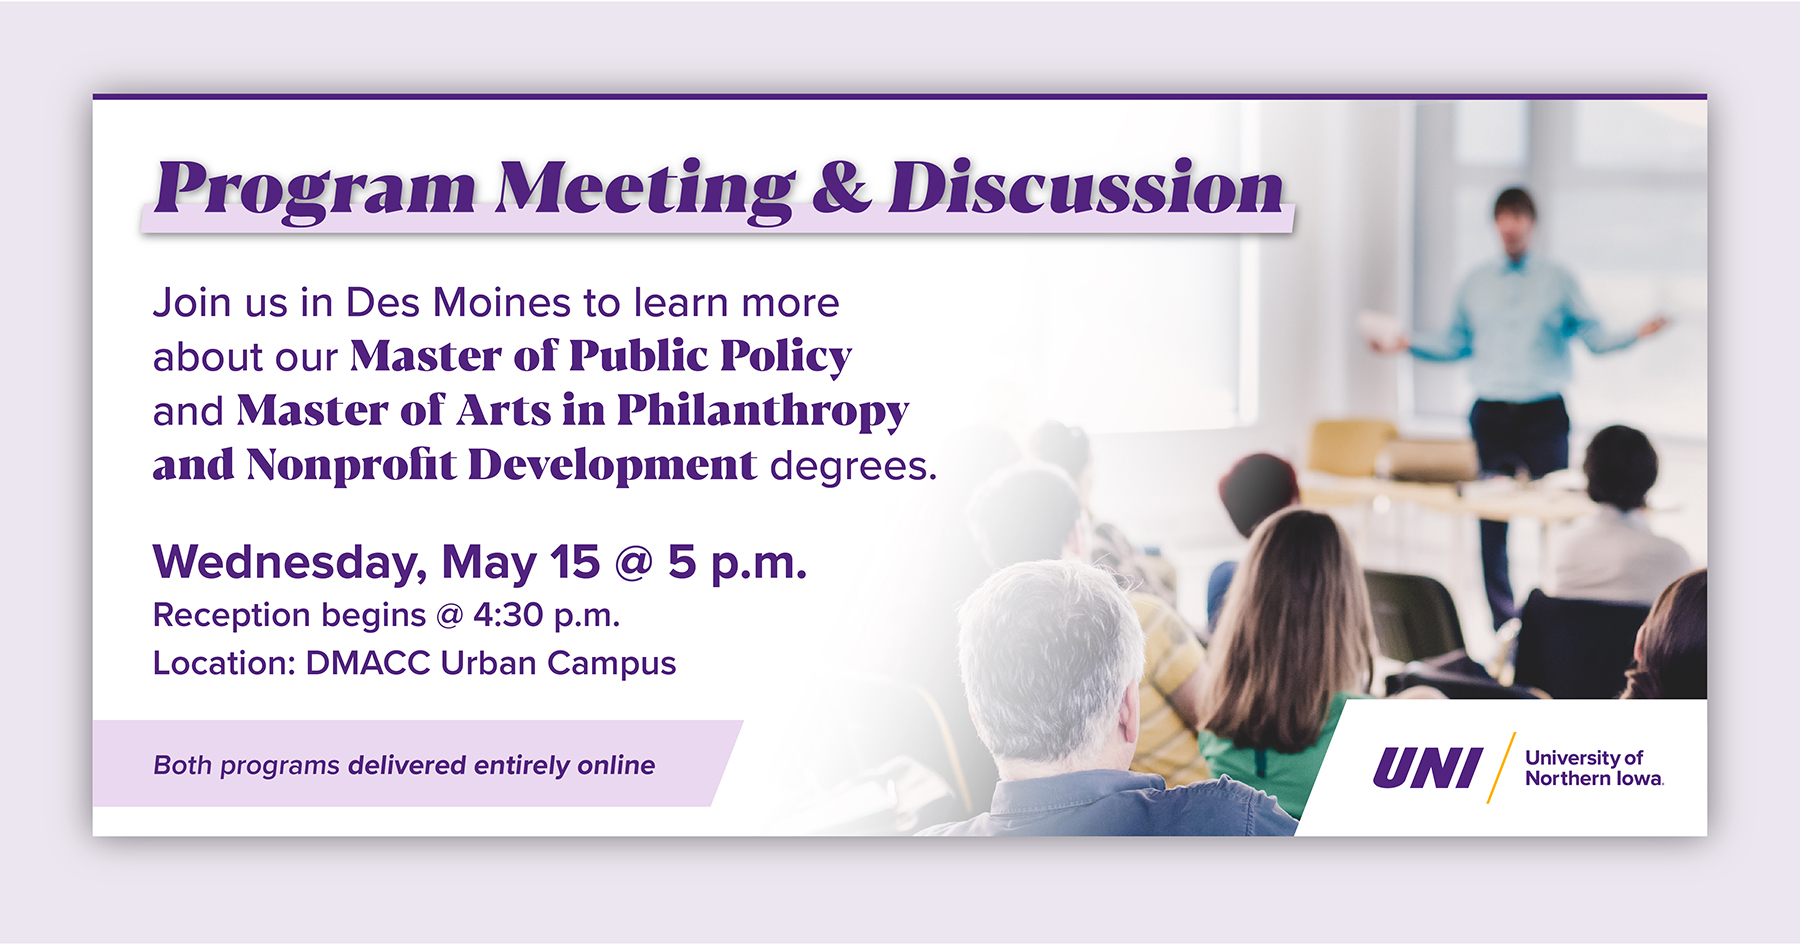 Program meeting and discussion: join us in Des Moines to learn more about our Master of Public Policy and Master of Arts in Philanthropy and Nonprofit Development degrees. Wednesday, May 15 at 5 p.m. Reception begins at 4:30 p.m. Location: DMACC Urban Campus. Both programs delivered entirely online.